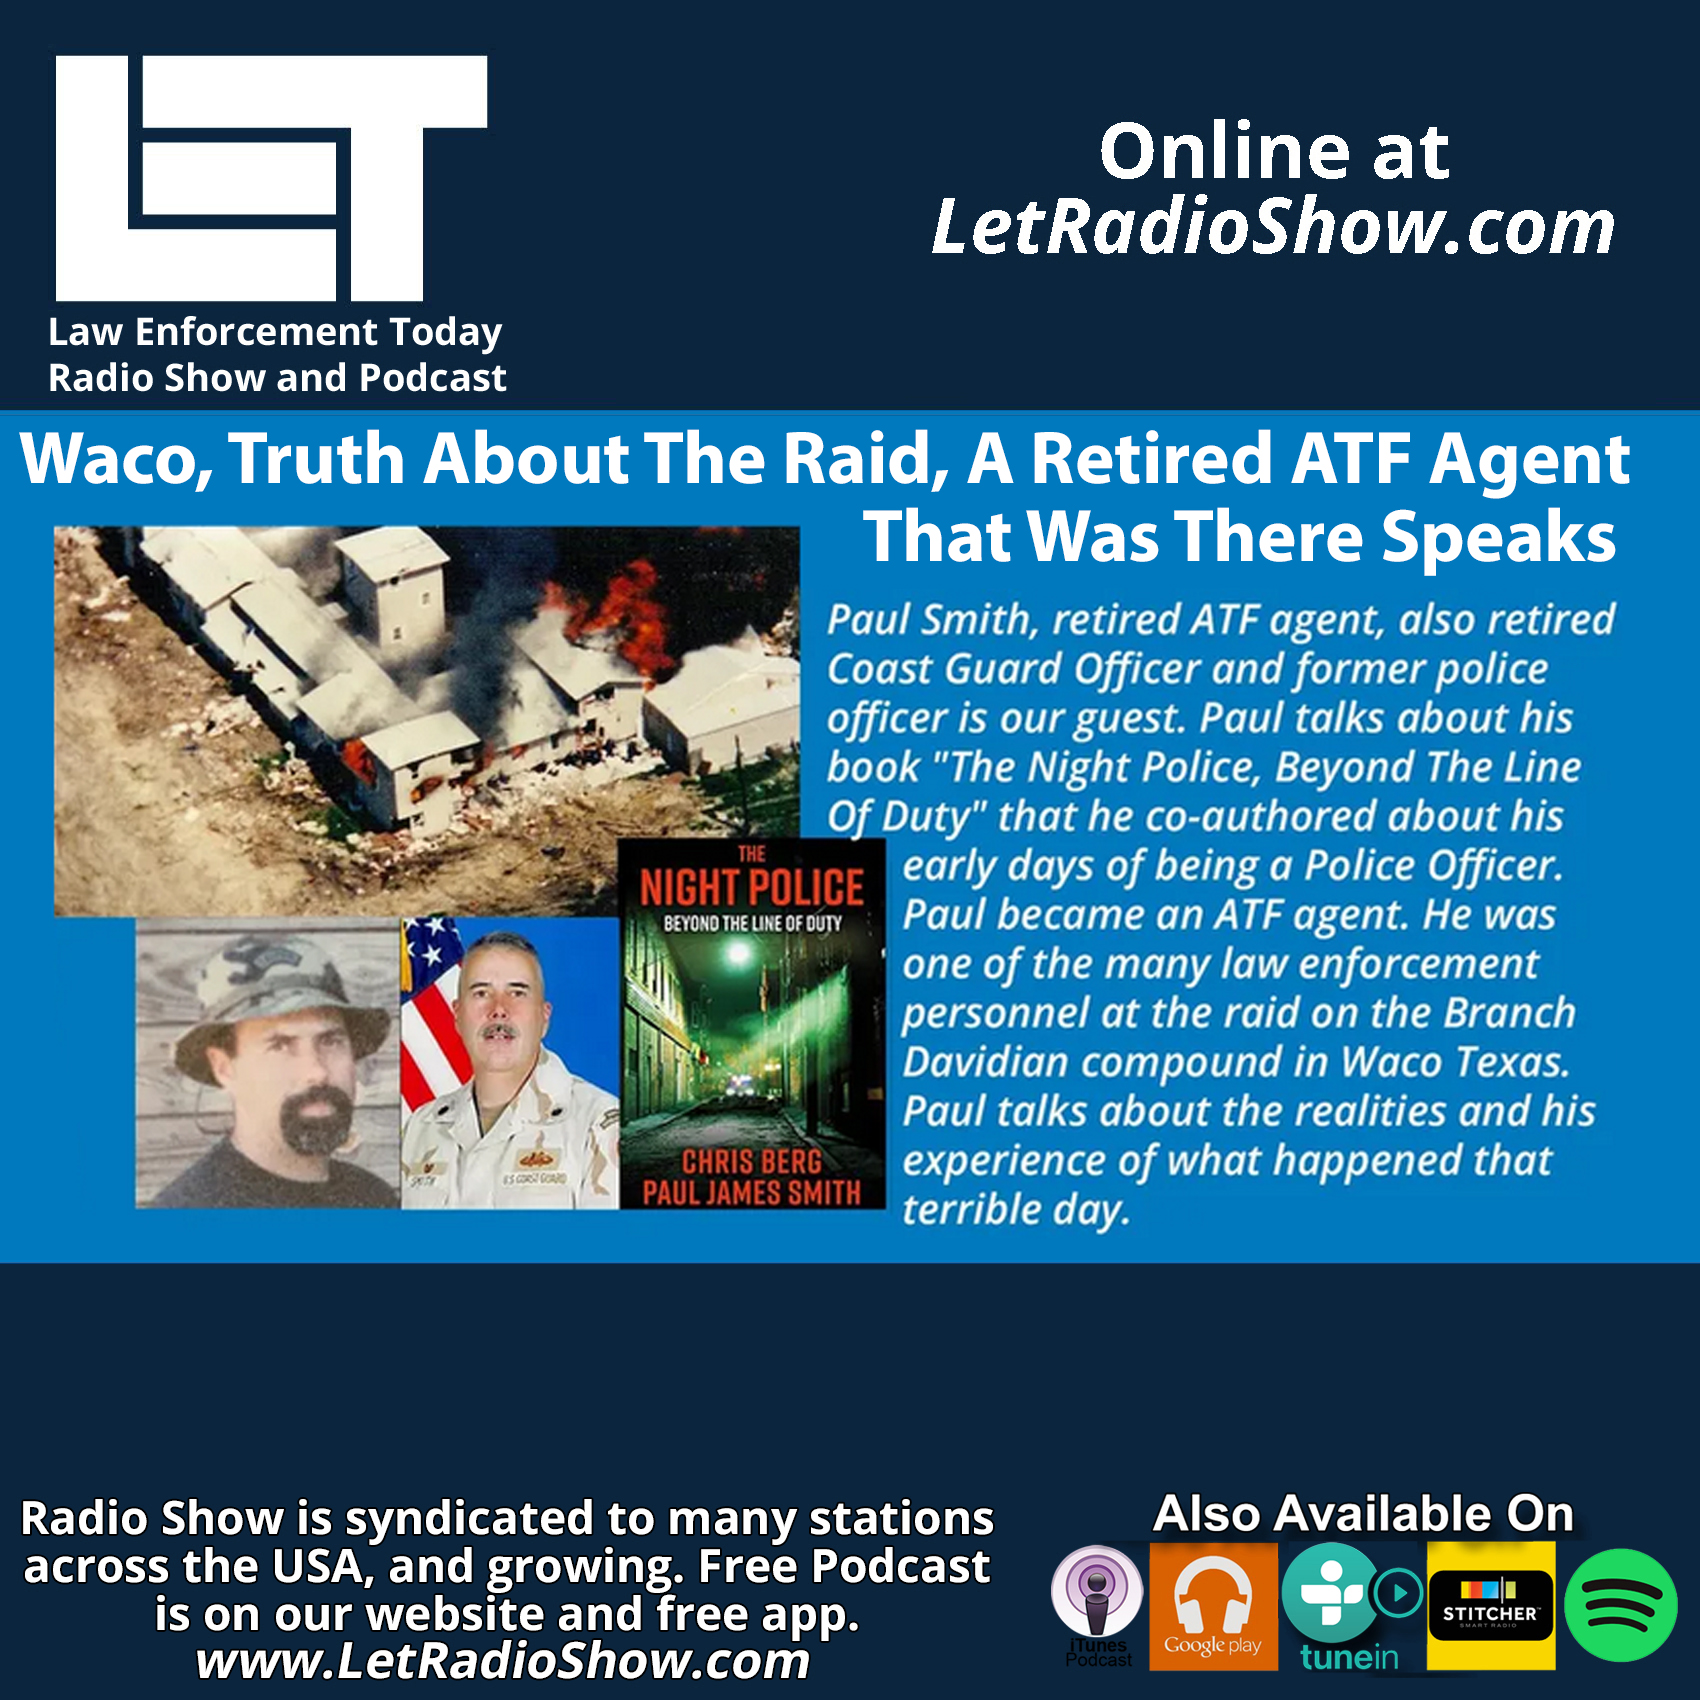 S6E101: Waco, Truth About The Raid, A Retired ATF Agent. Special Episode.